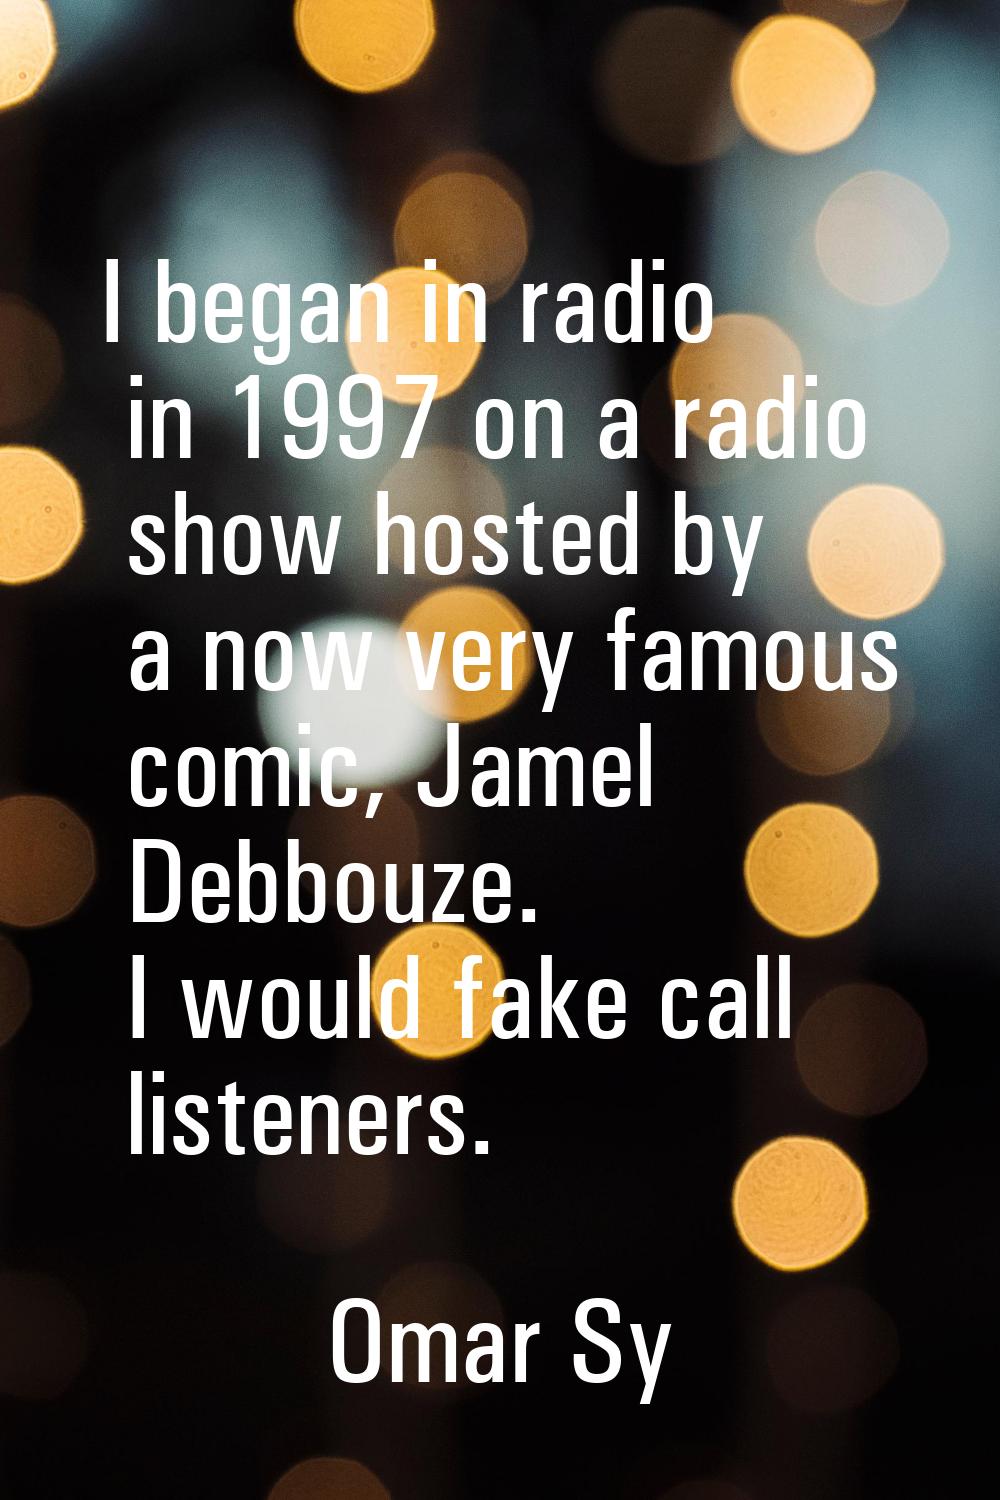 I began in radio in 1997 on a radio show hosted by a now very famous comic, Jamel Debbouze. I would